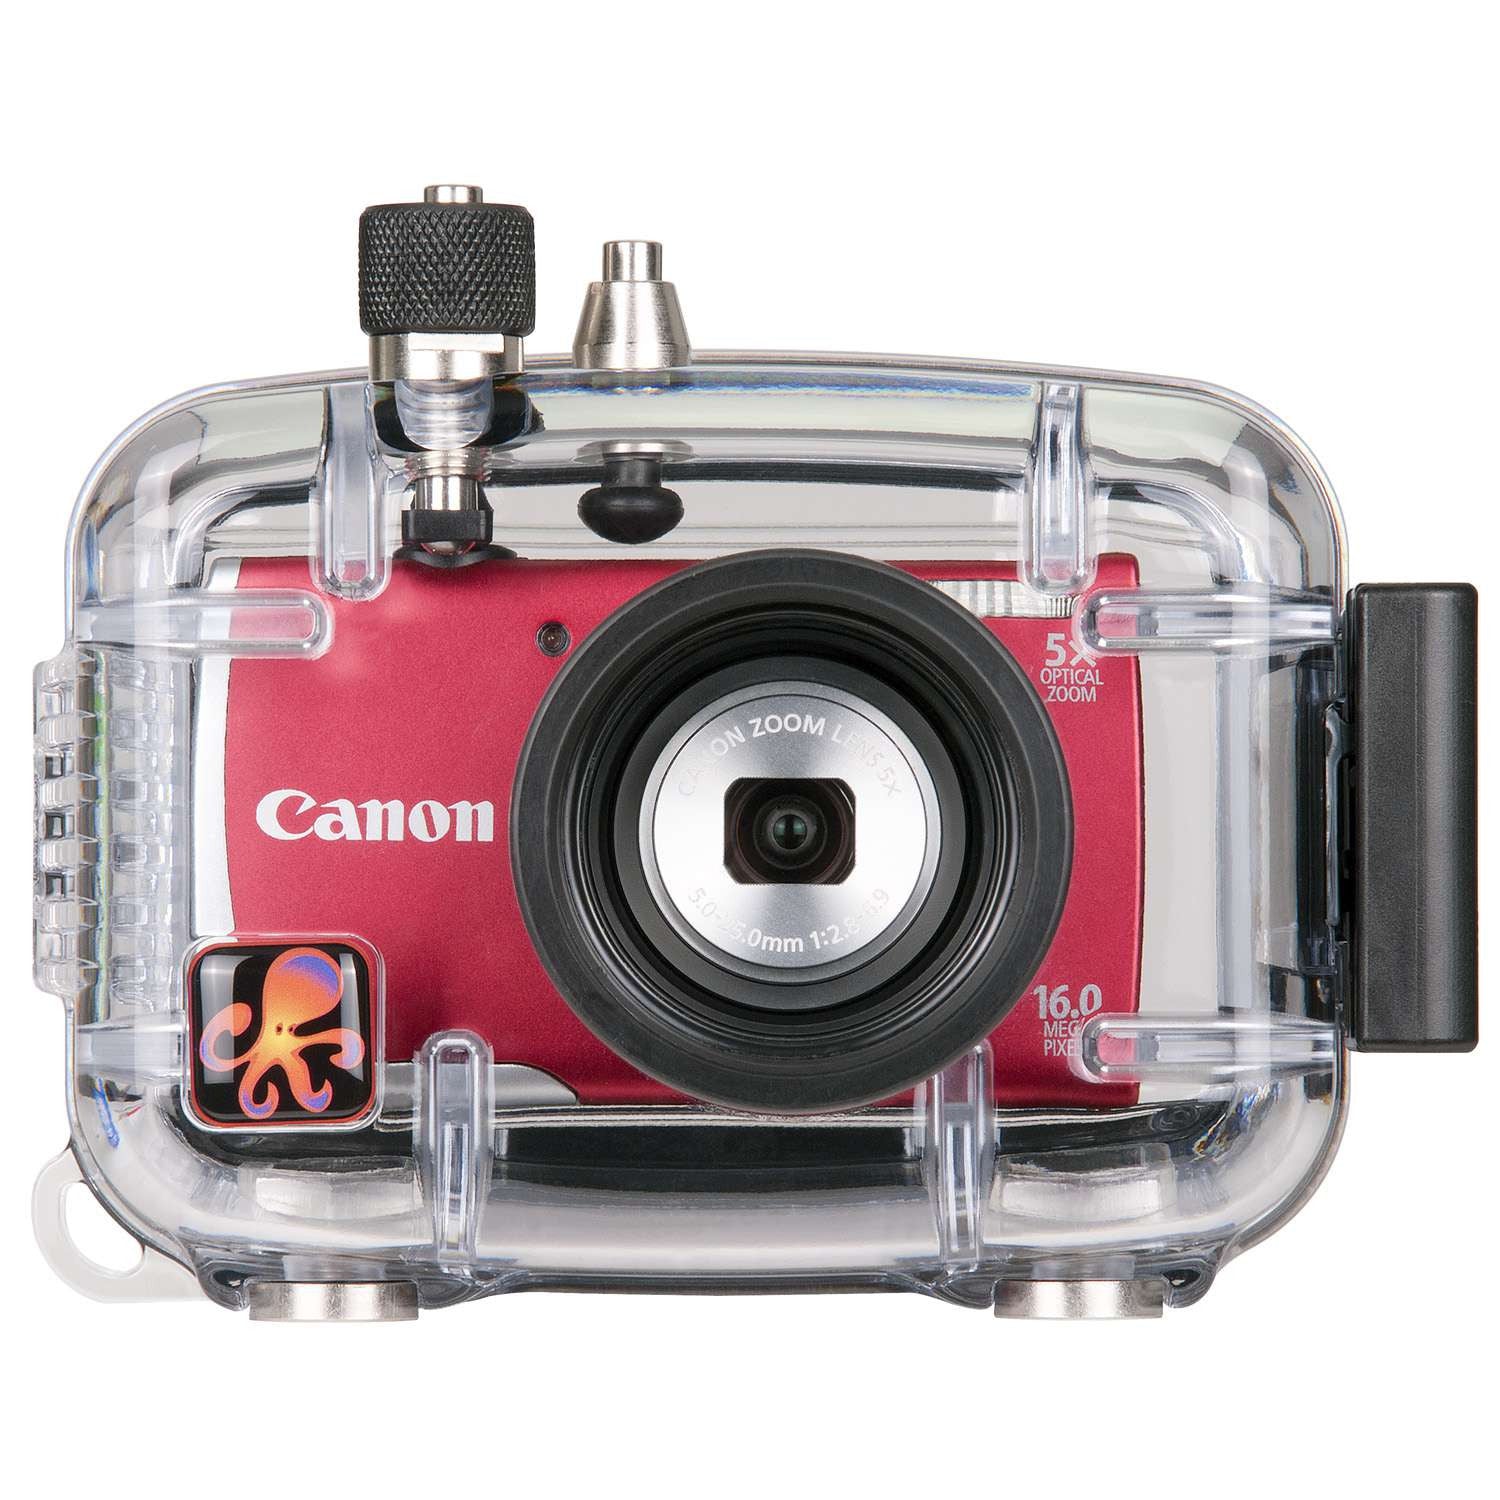 Underwater Housing for Canon PowerShot A2500